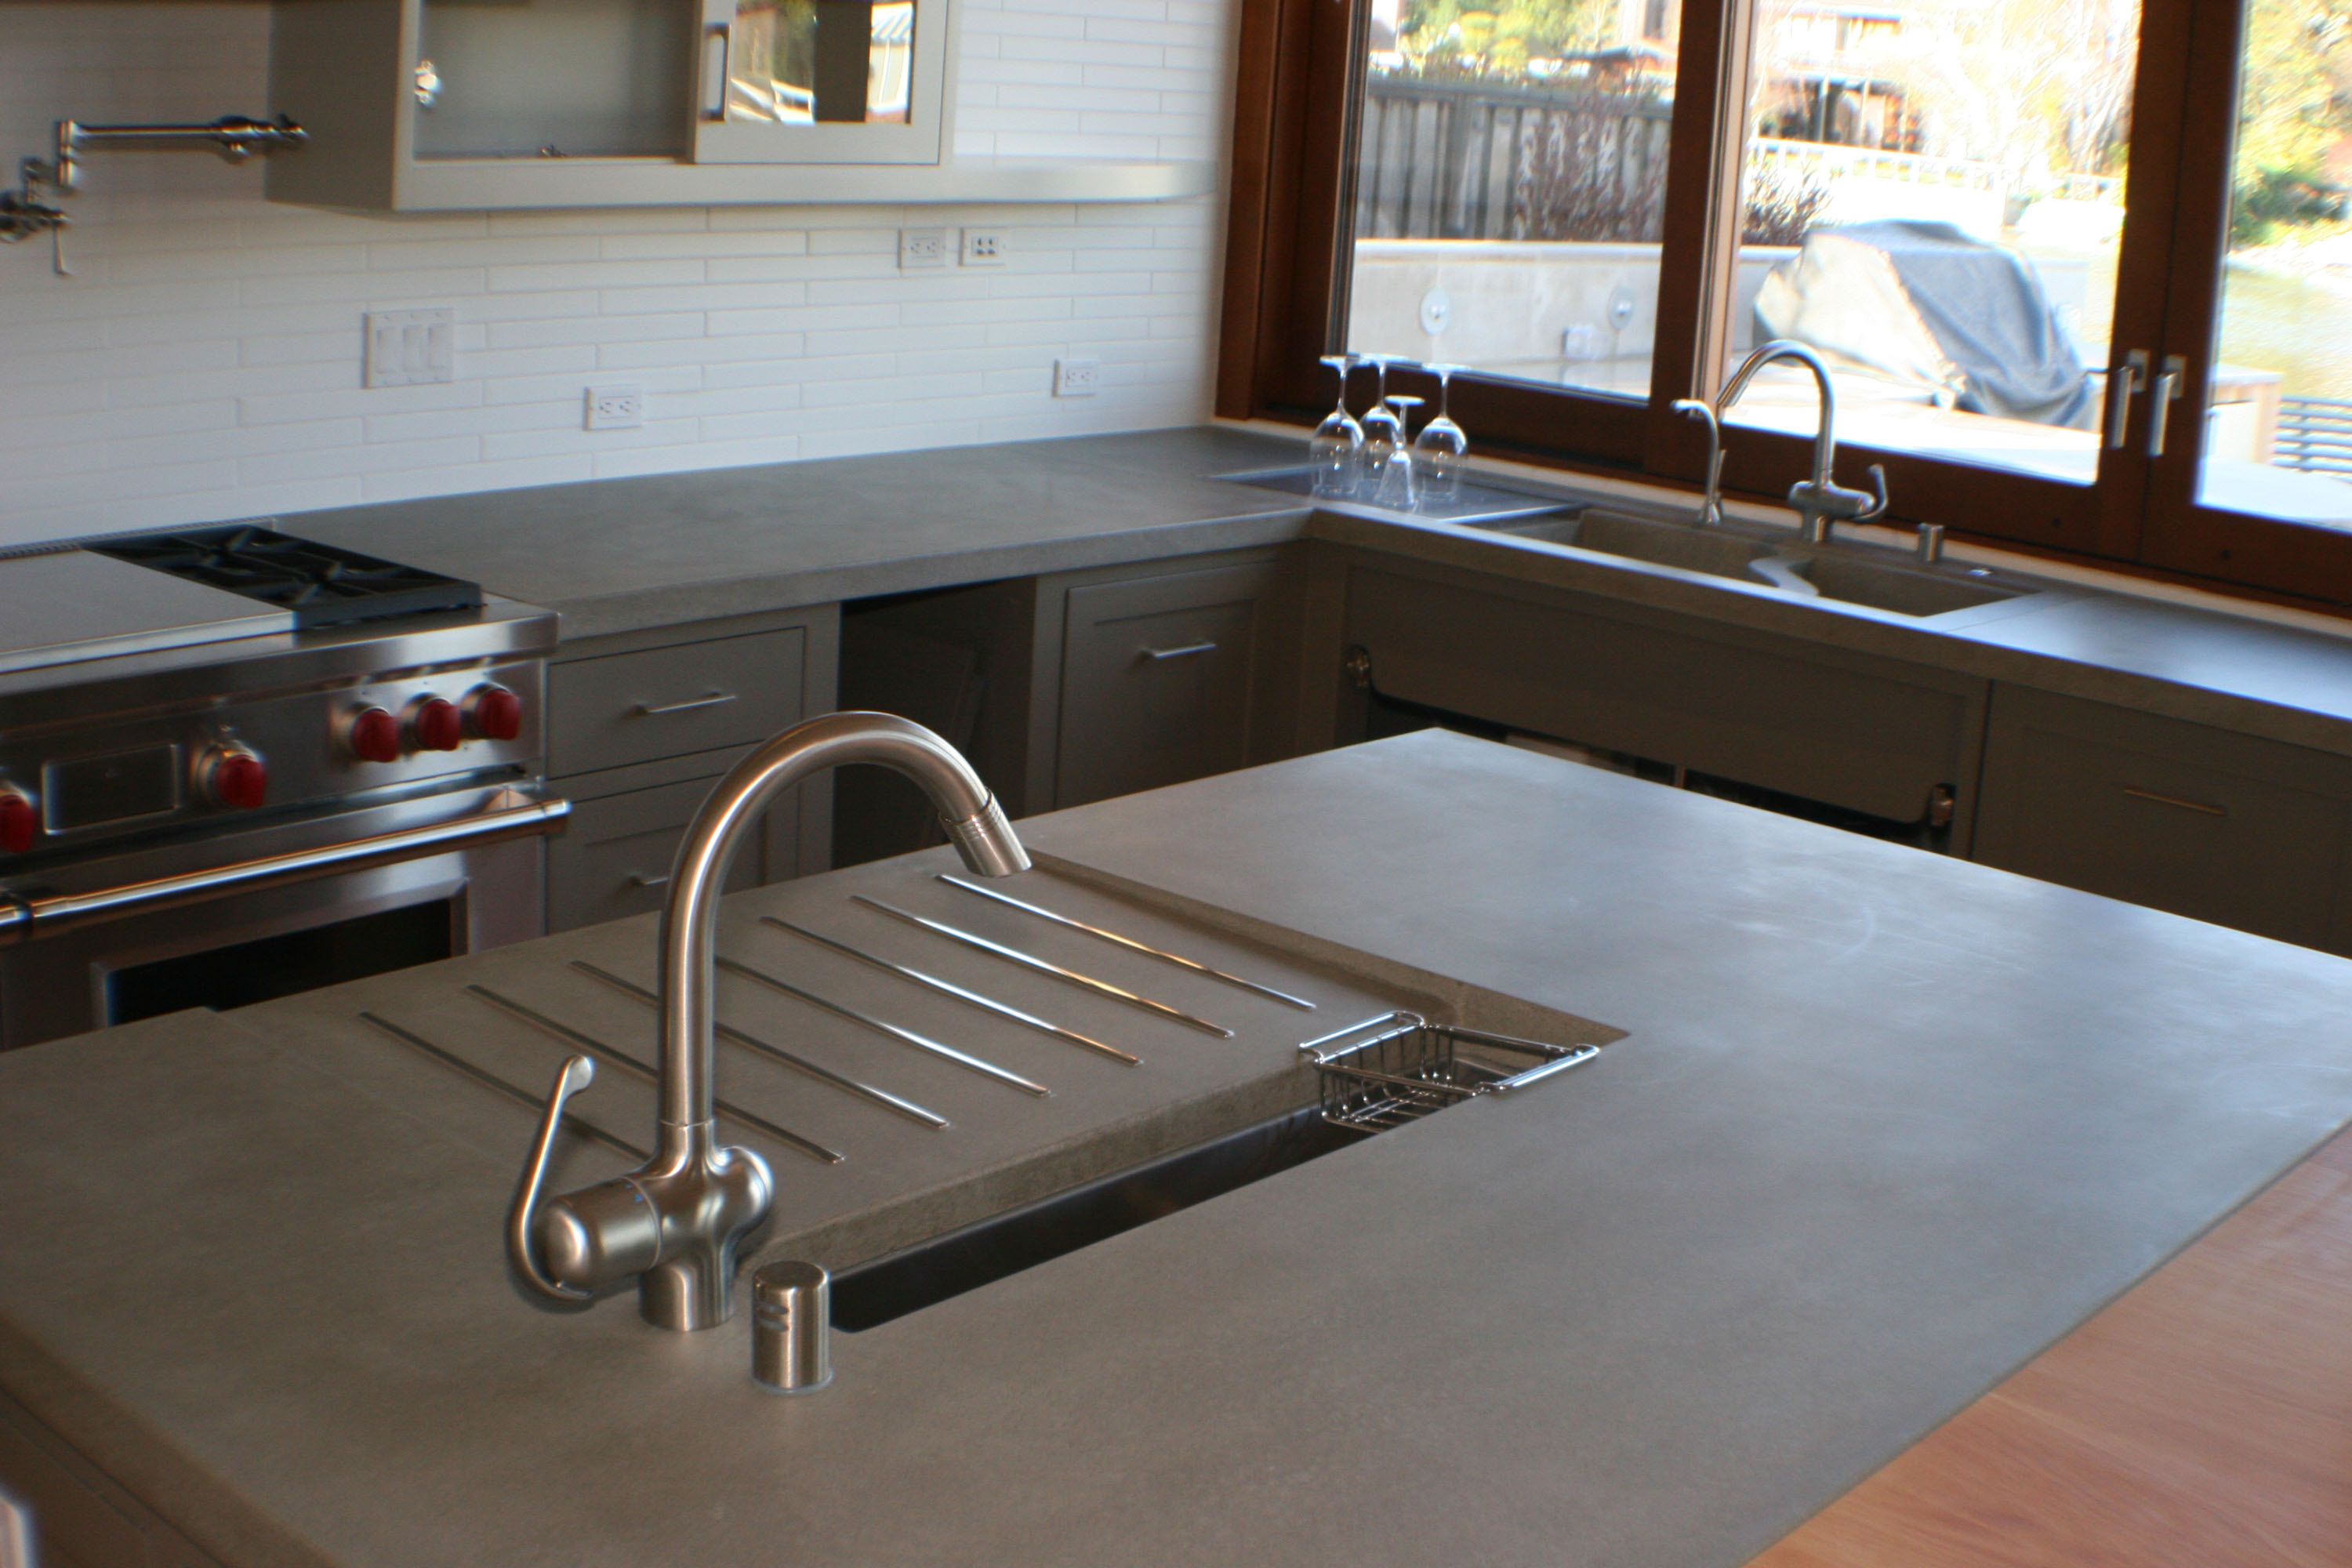 UnderMount Sink with Concrete Countertop, N634 Alloy